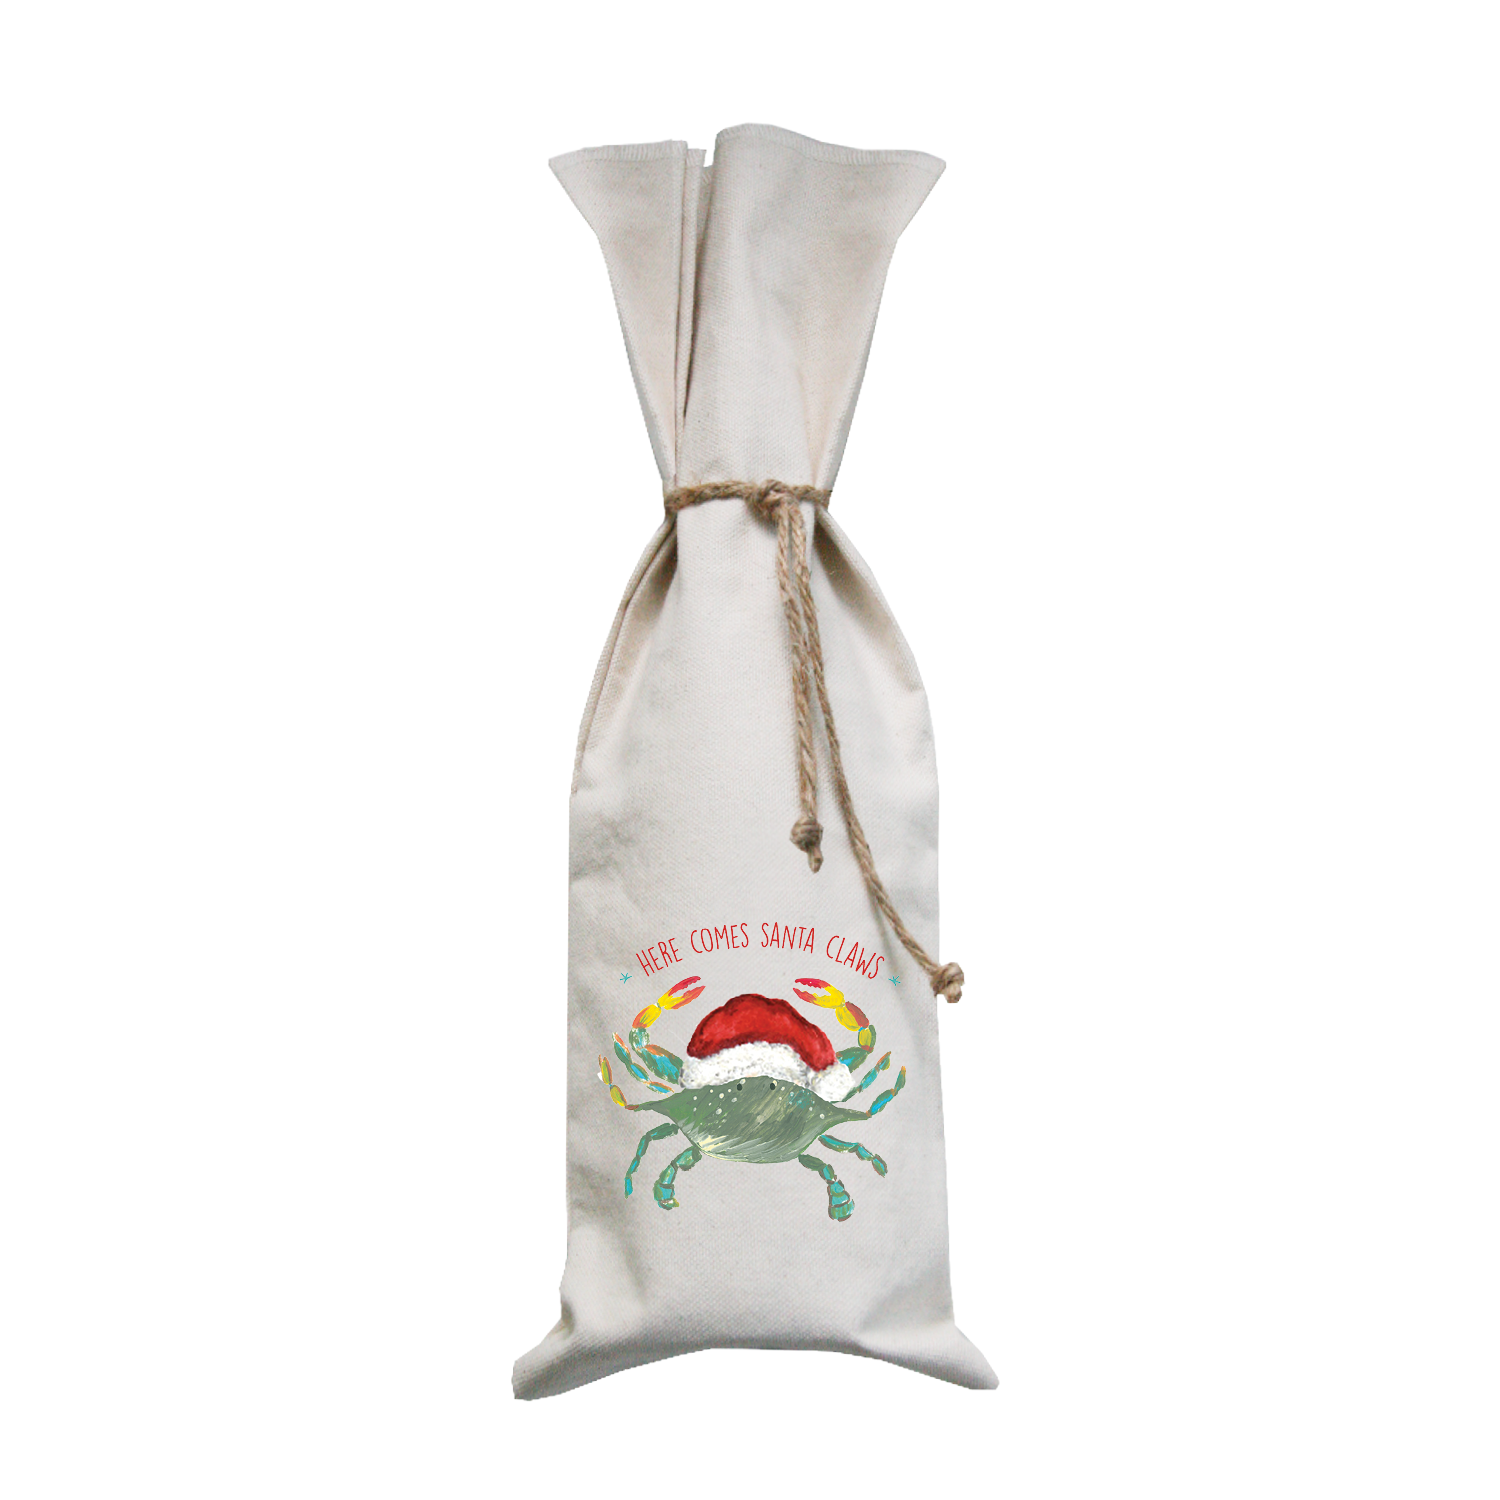 here comes santa claws wine bag